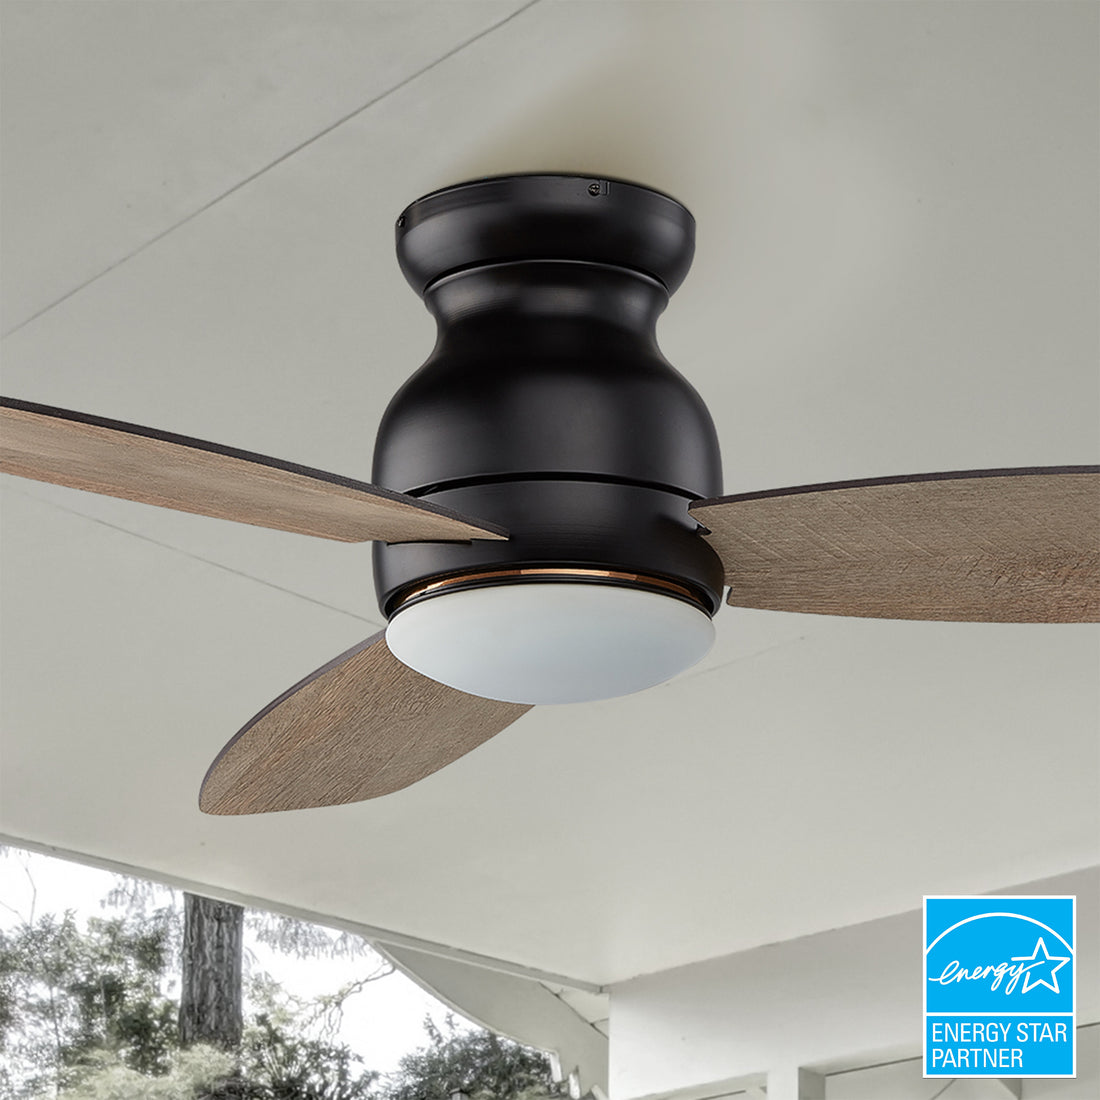 Smafan 48 inch Trendsetter smart ceiling fan designed with wood finish, elegant Plywood blades and integrated 4000K LED daylight.